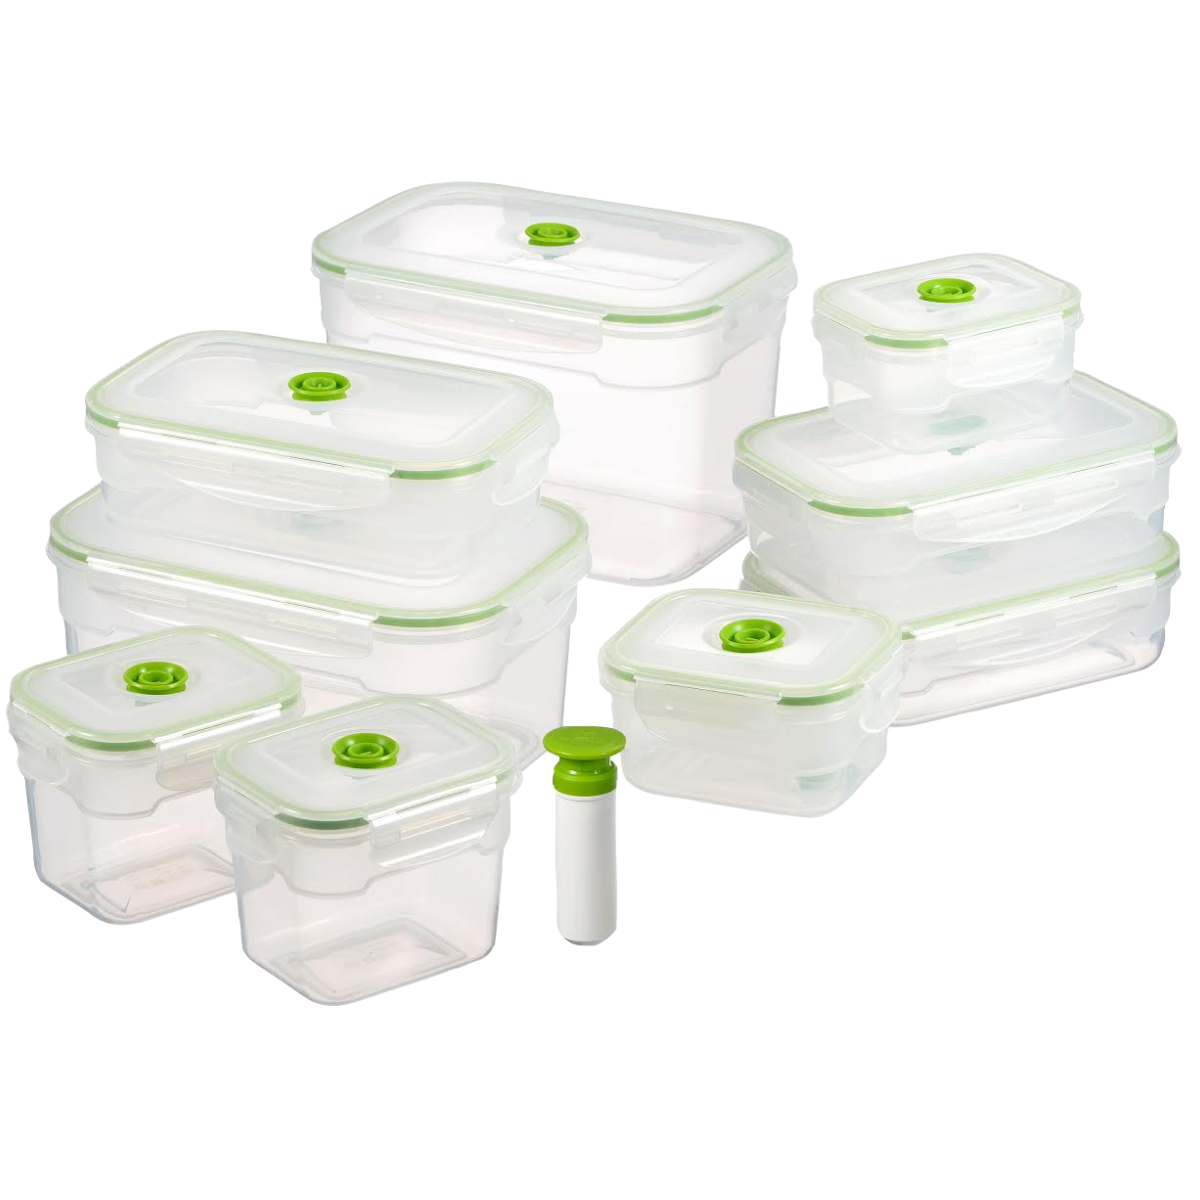 Airtight Glass Containers With Vacuum Seal - vacuumsaver